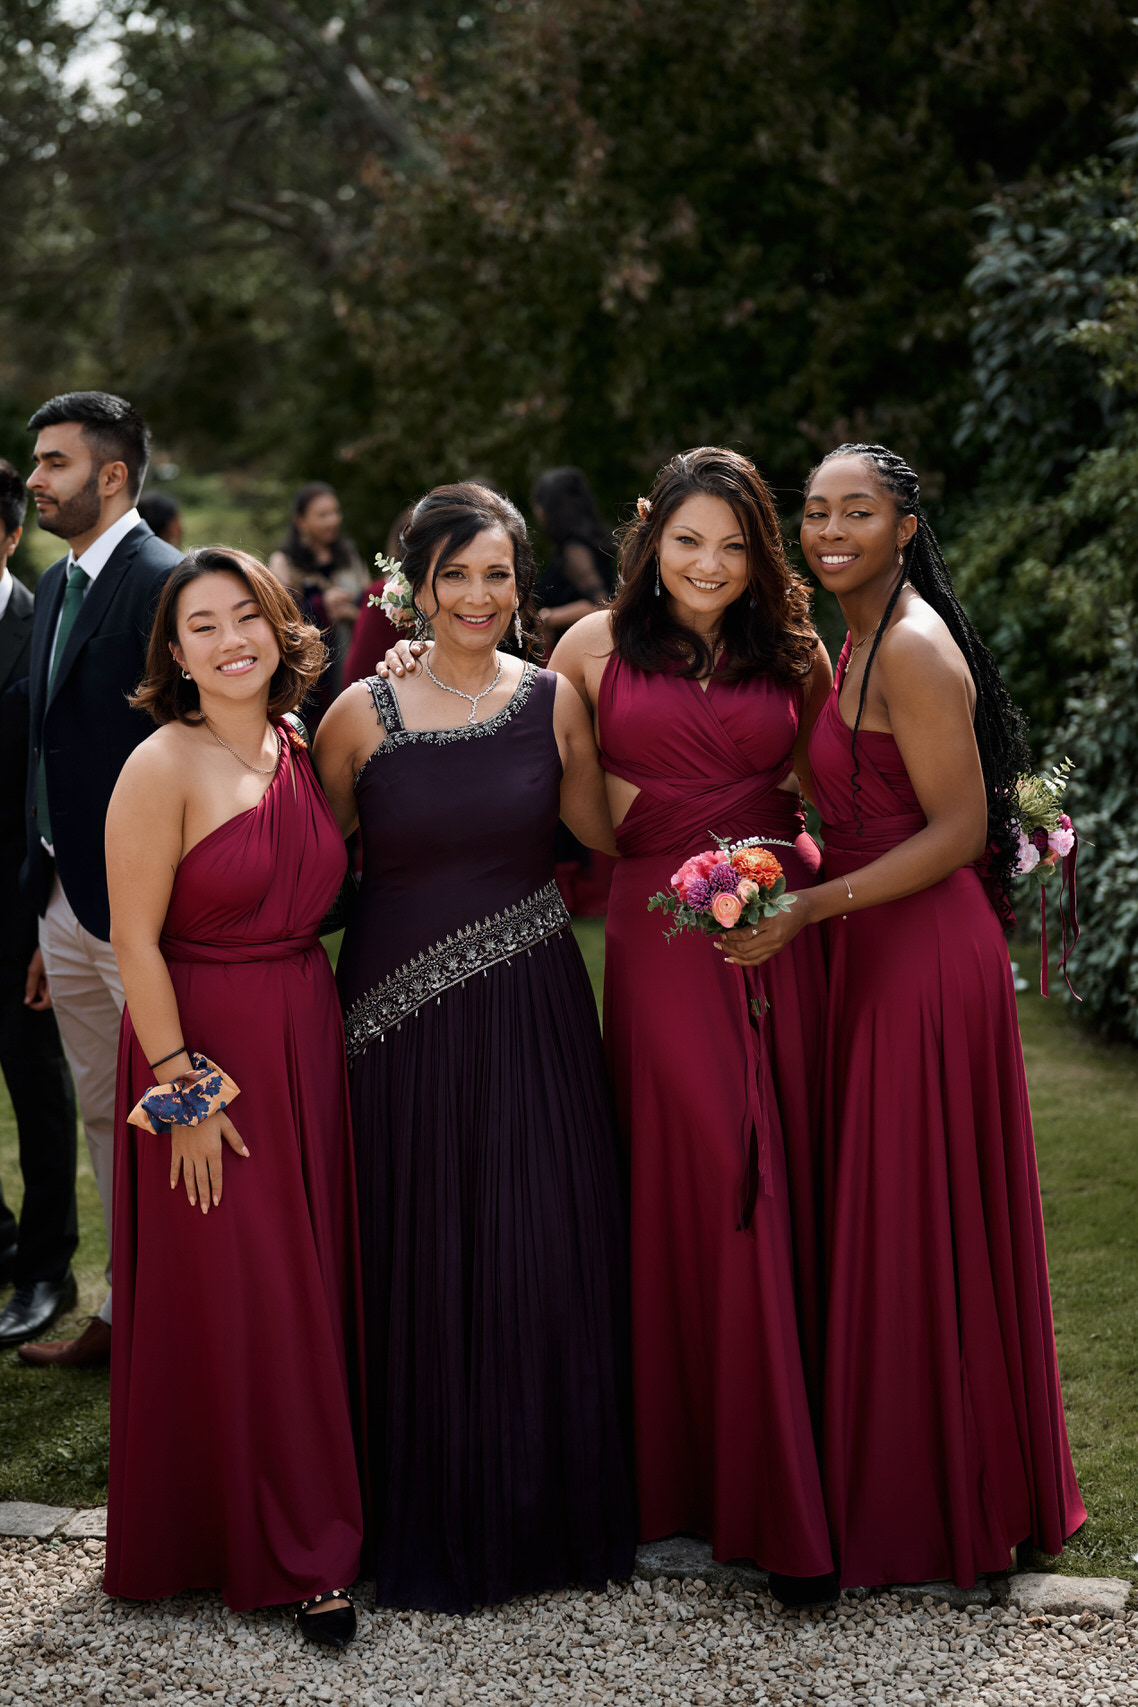 A bunch of bridesmaids in dark red dresses are taking a picture.